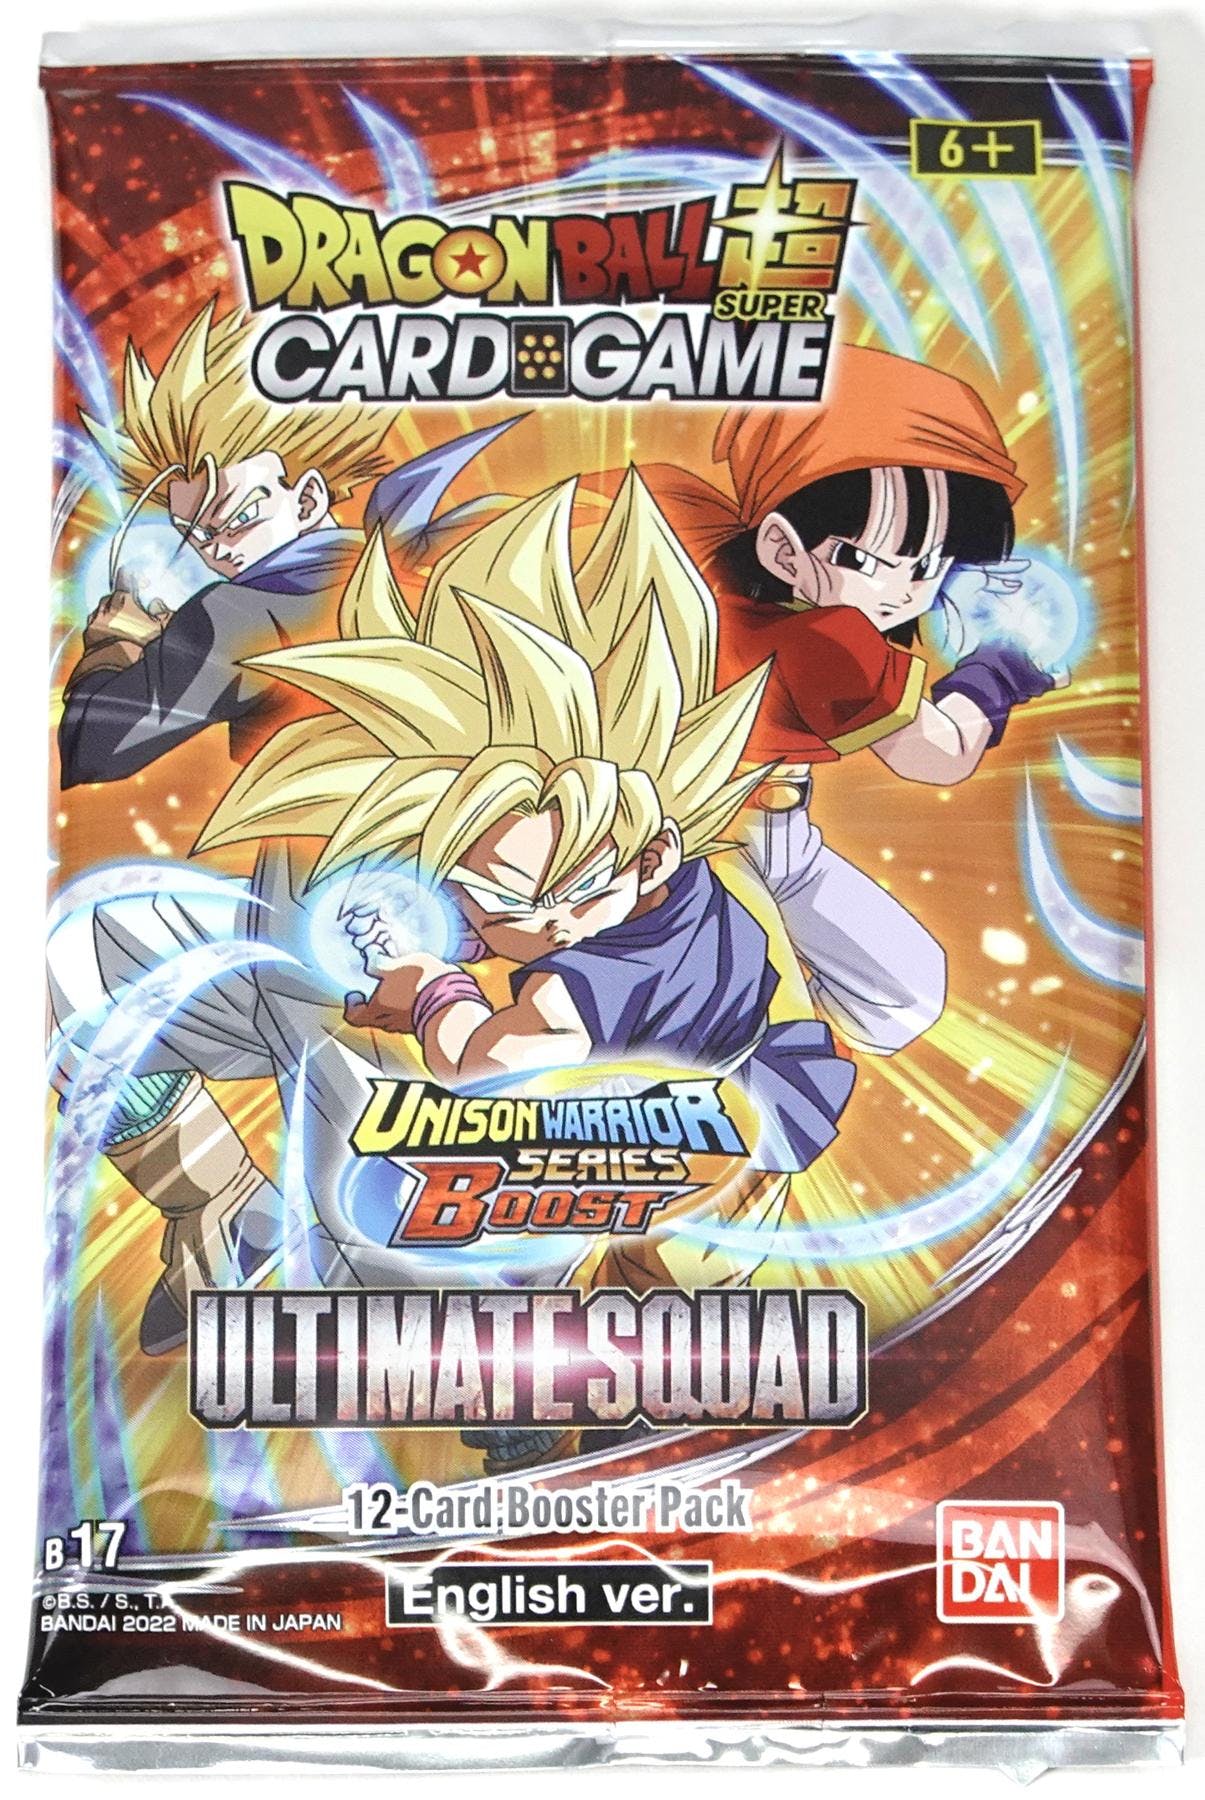 Dragon Ball TCG - Ultimate Squad Booster Pack